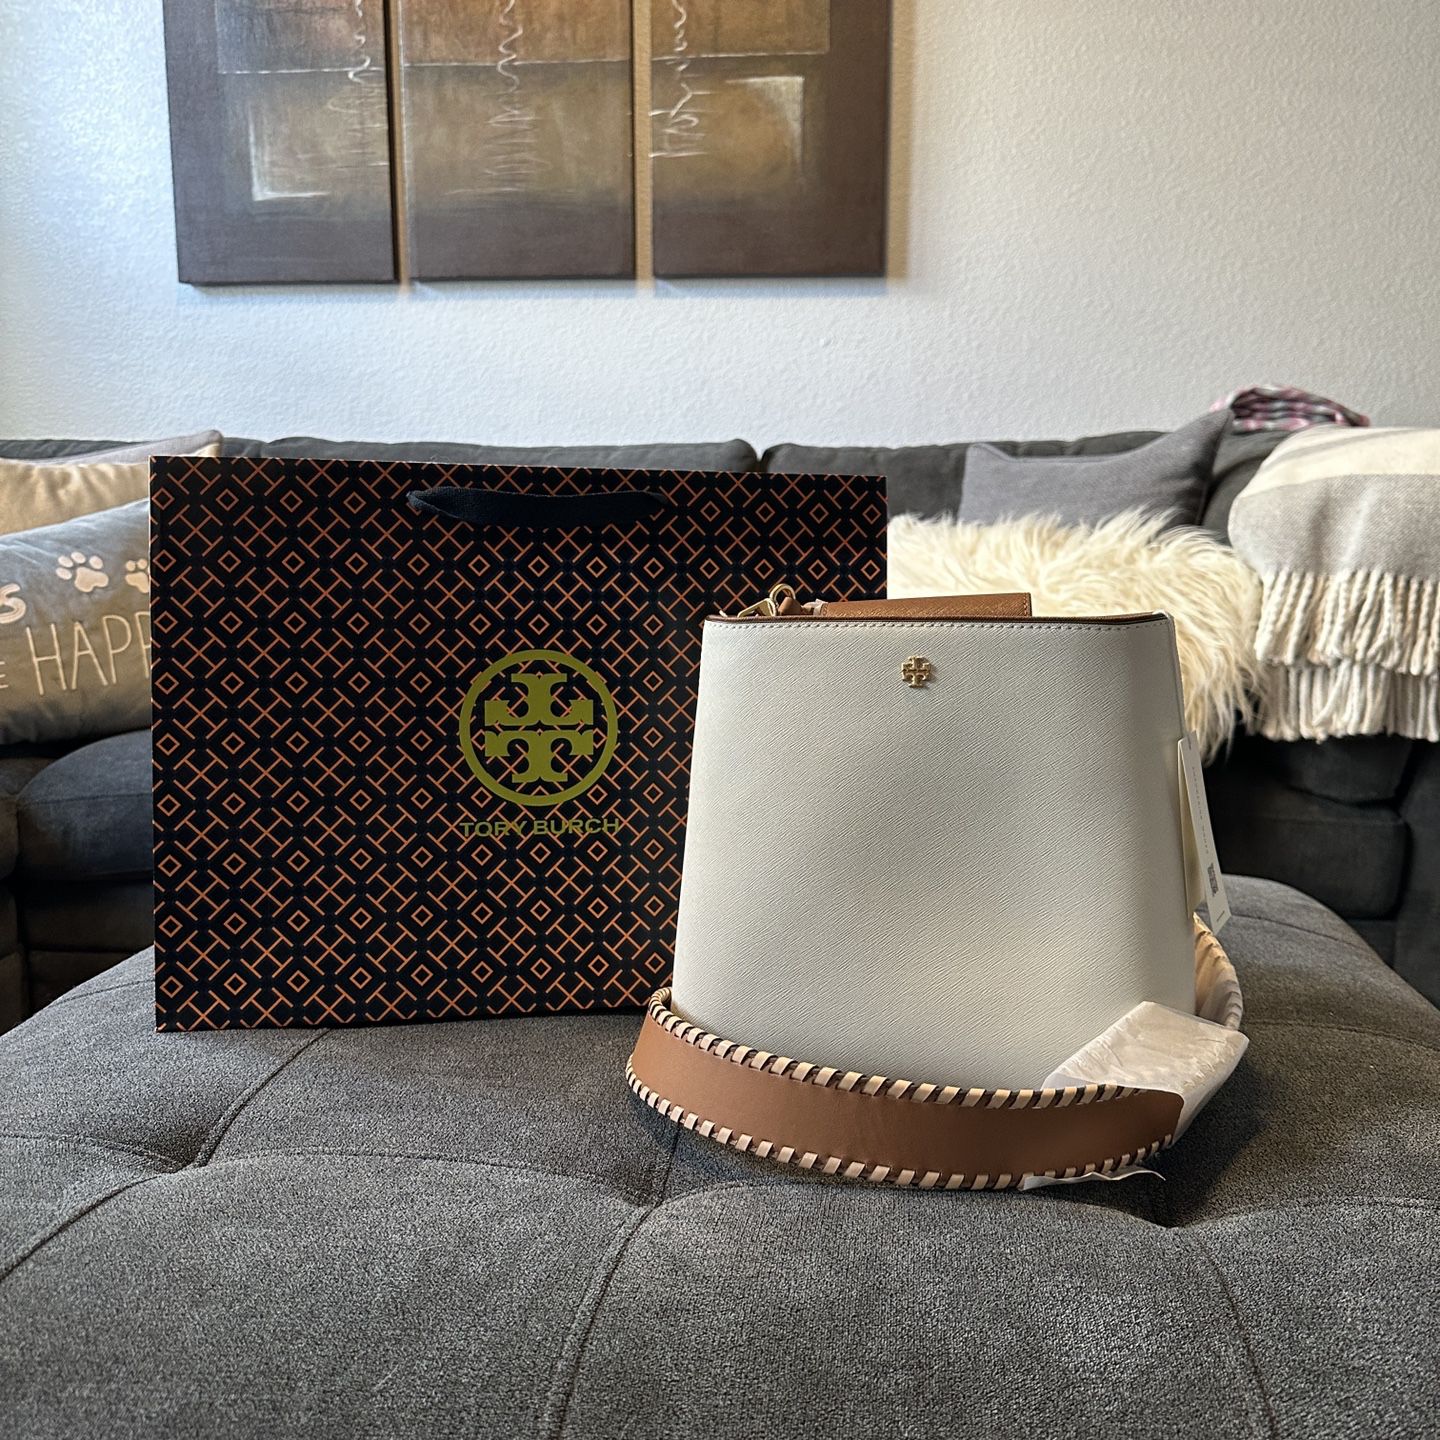 Tory Burch - Emerson Bucket Bag - White/Tan for Sale in Chula